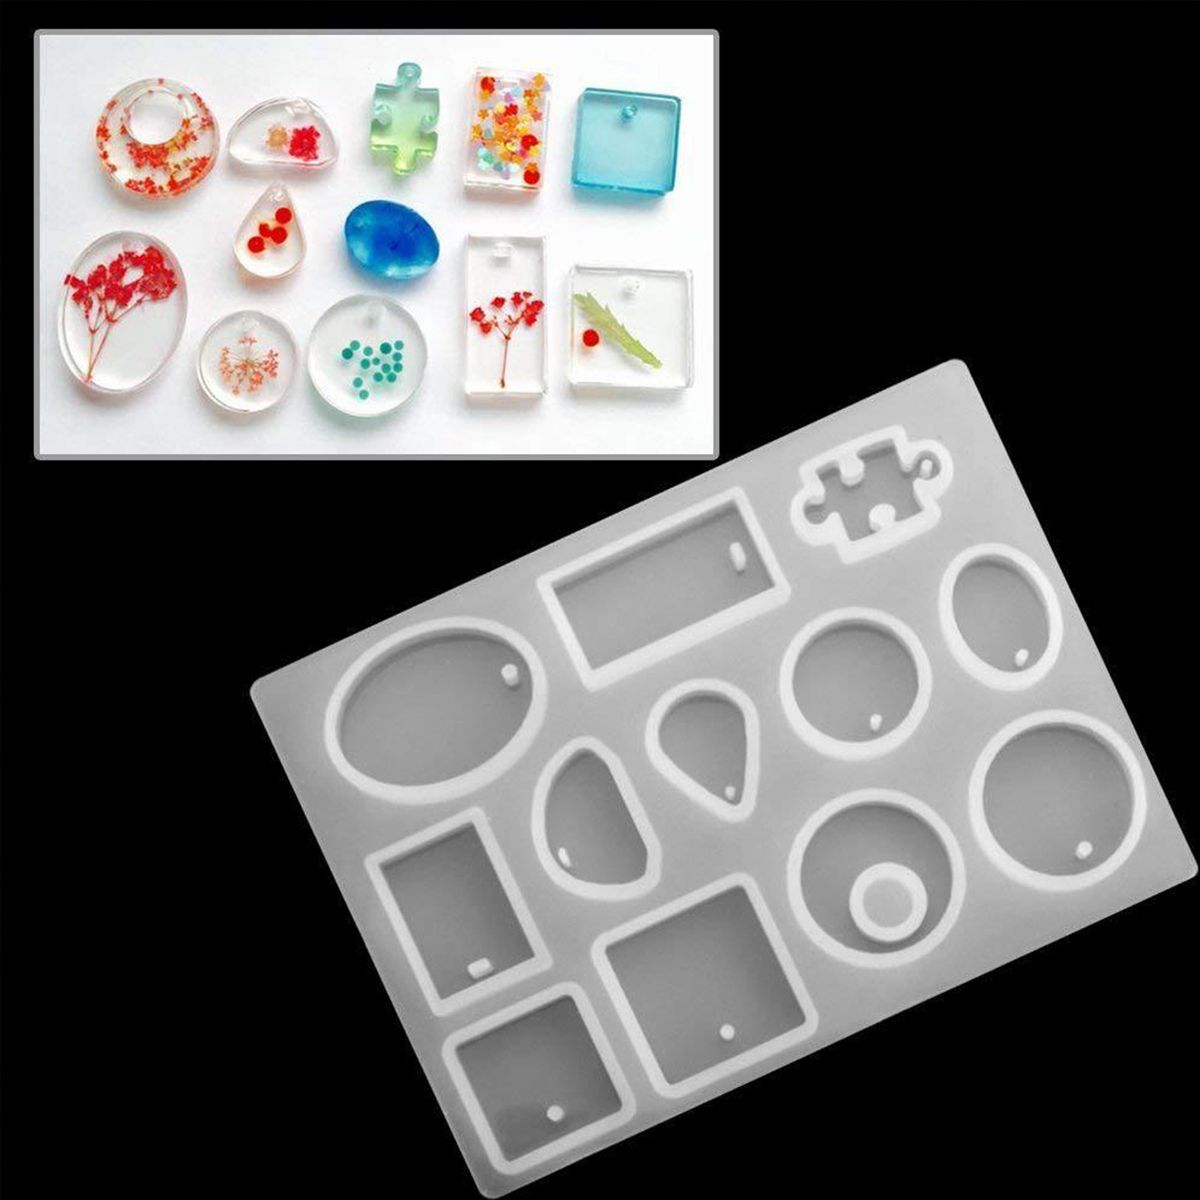 DIY-Resin-Casting-Molds-Silicone-Jewelry-Pendant-Craft-Making-Mould-Pendant-Tool-1532921